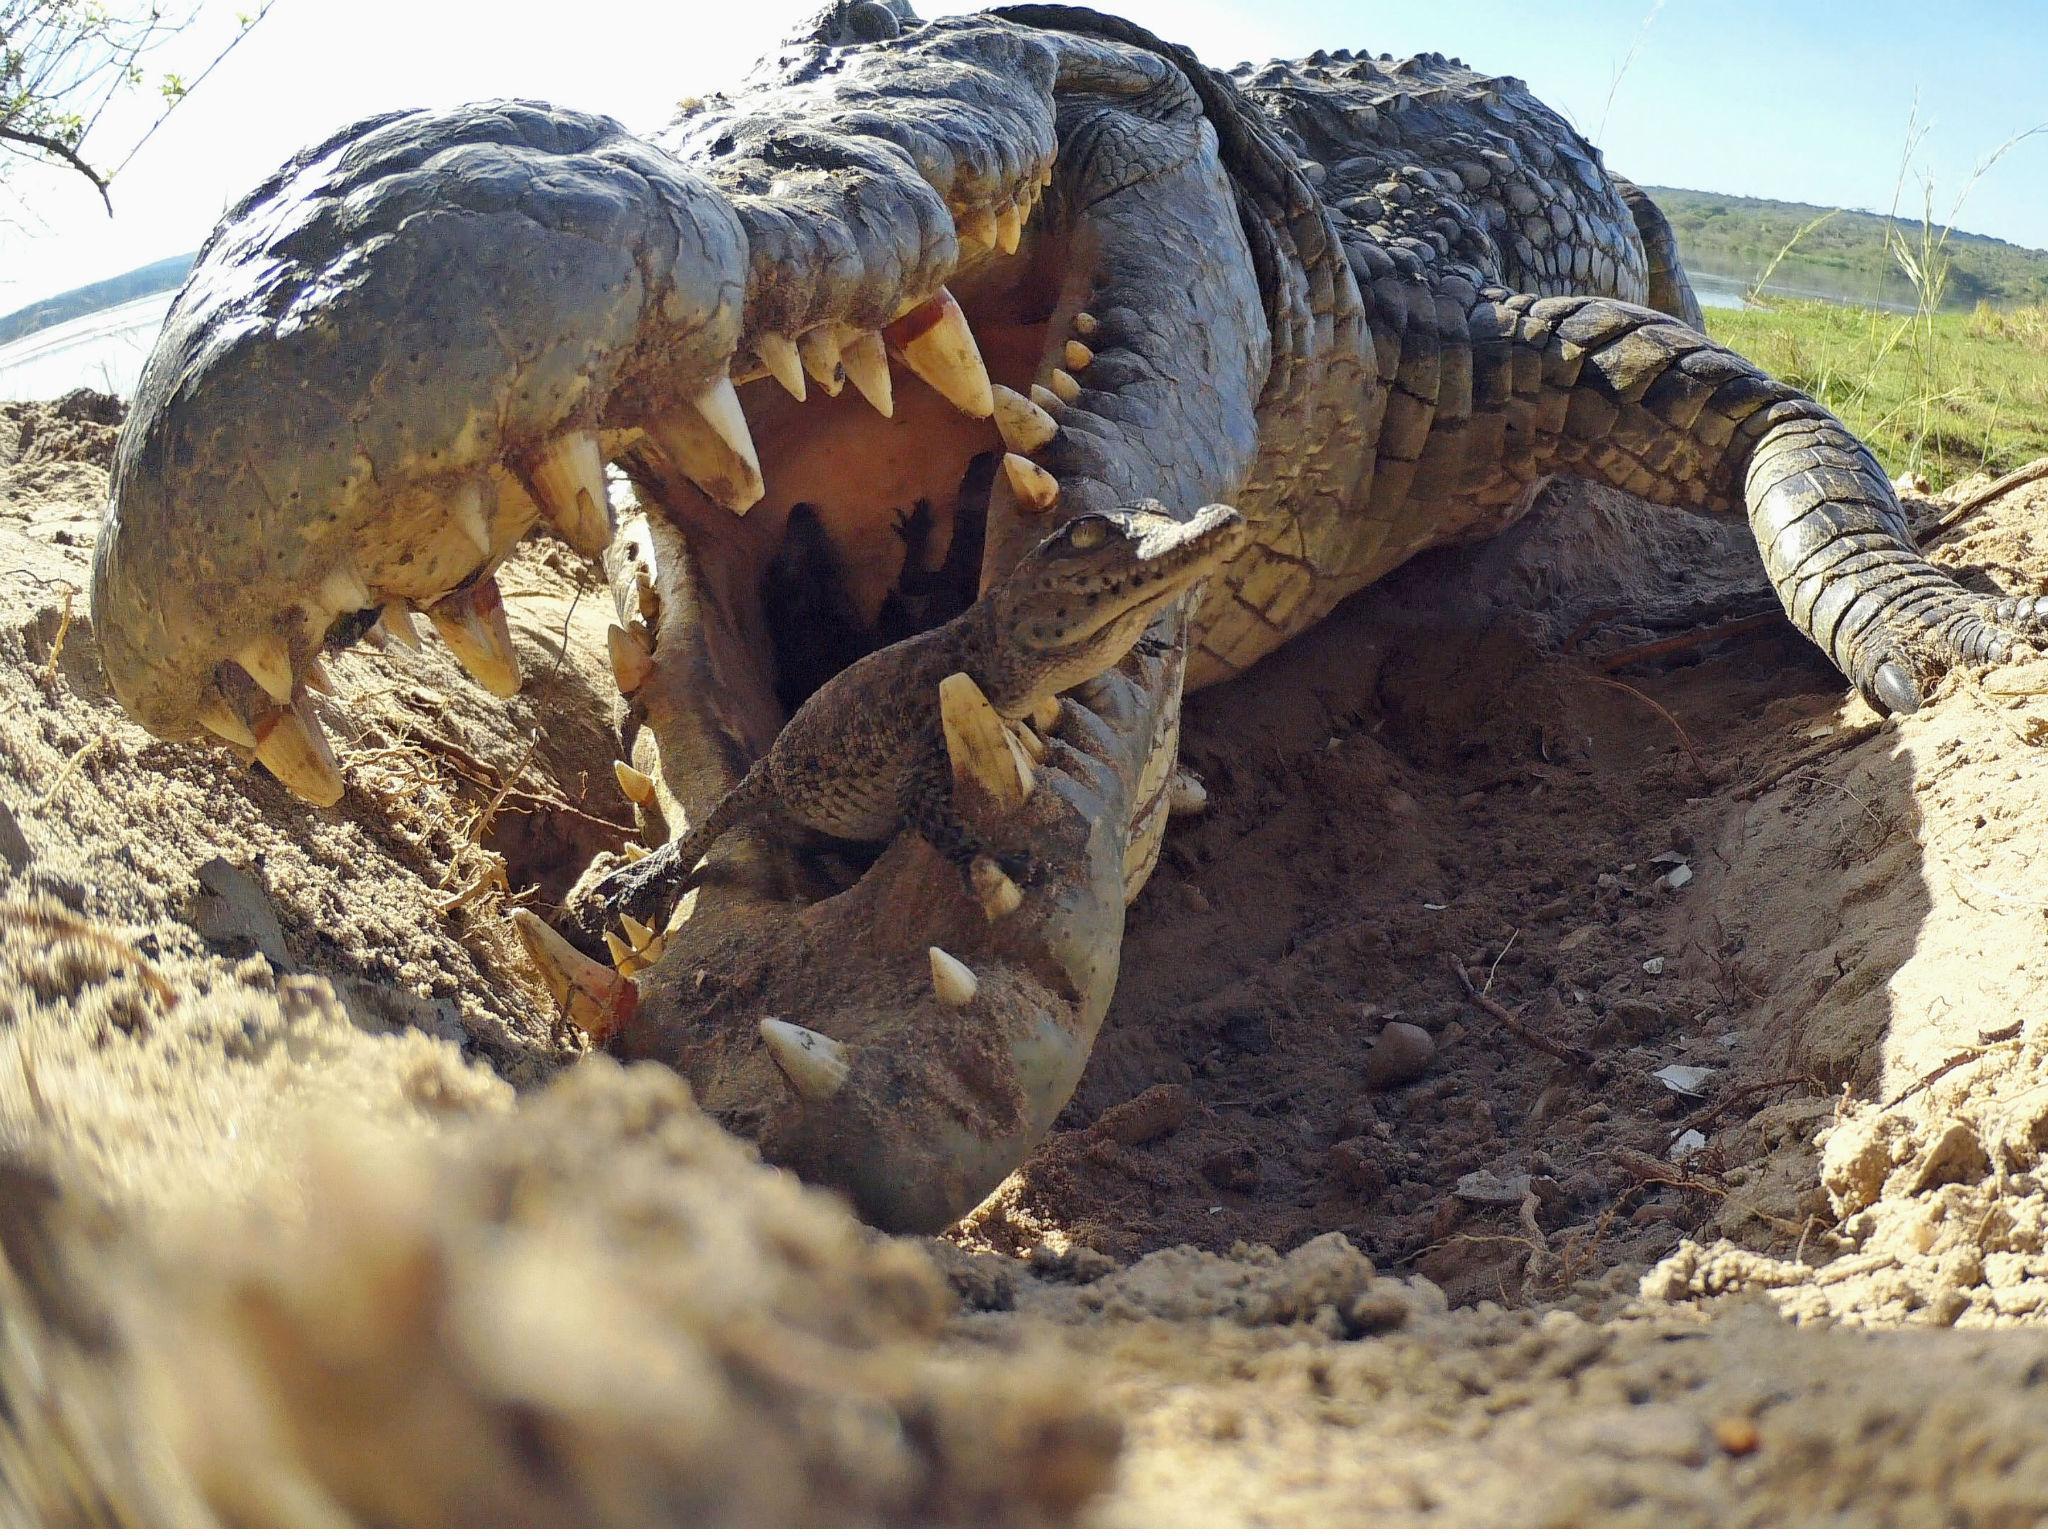 Crocodile with young in her mouth in Uganda in BBC's 'Spy in the Wild'